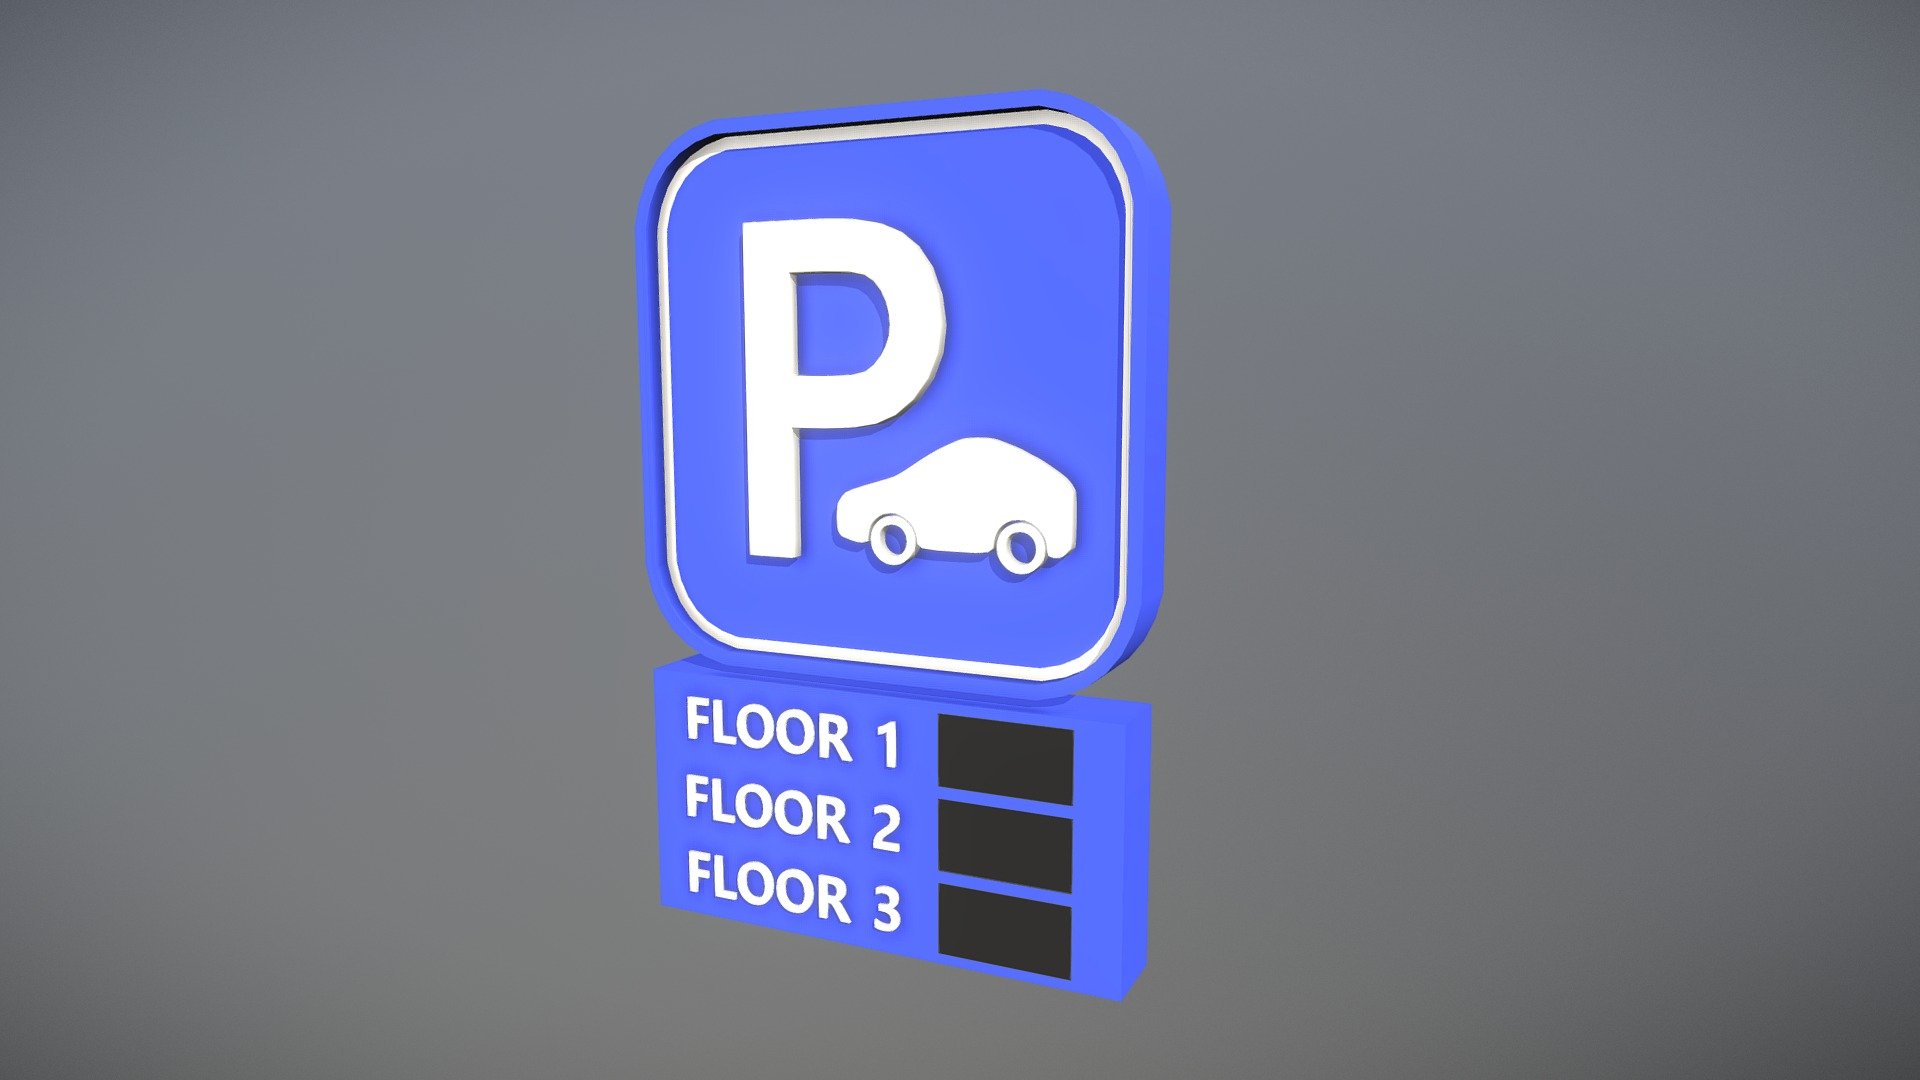 Parking sign made in 3ds max 2017 3d model